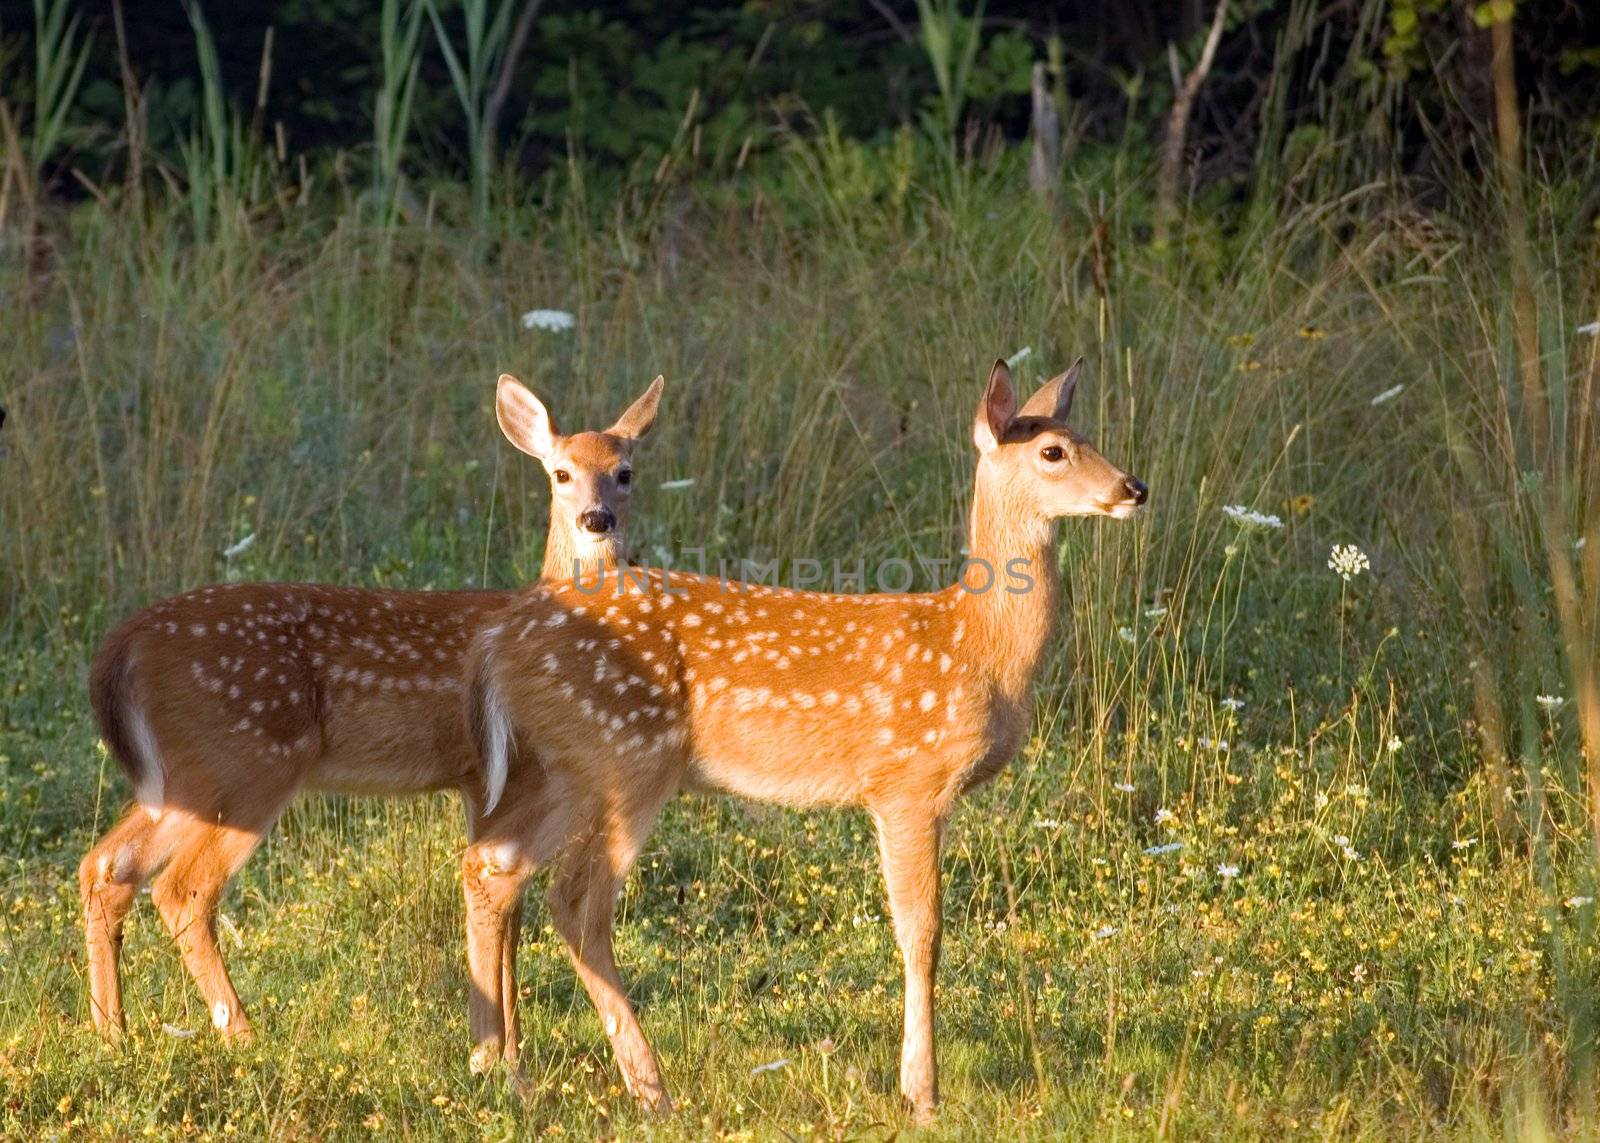 Two whitetail deer fawns standing in a field.